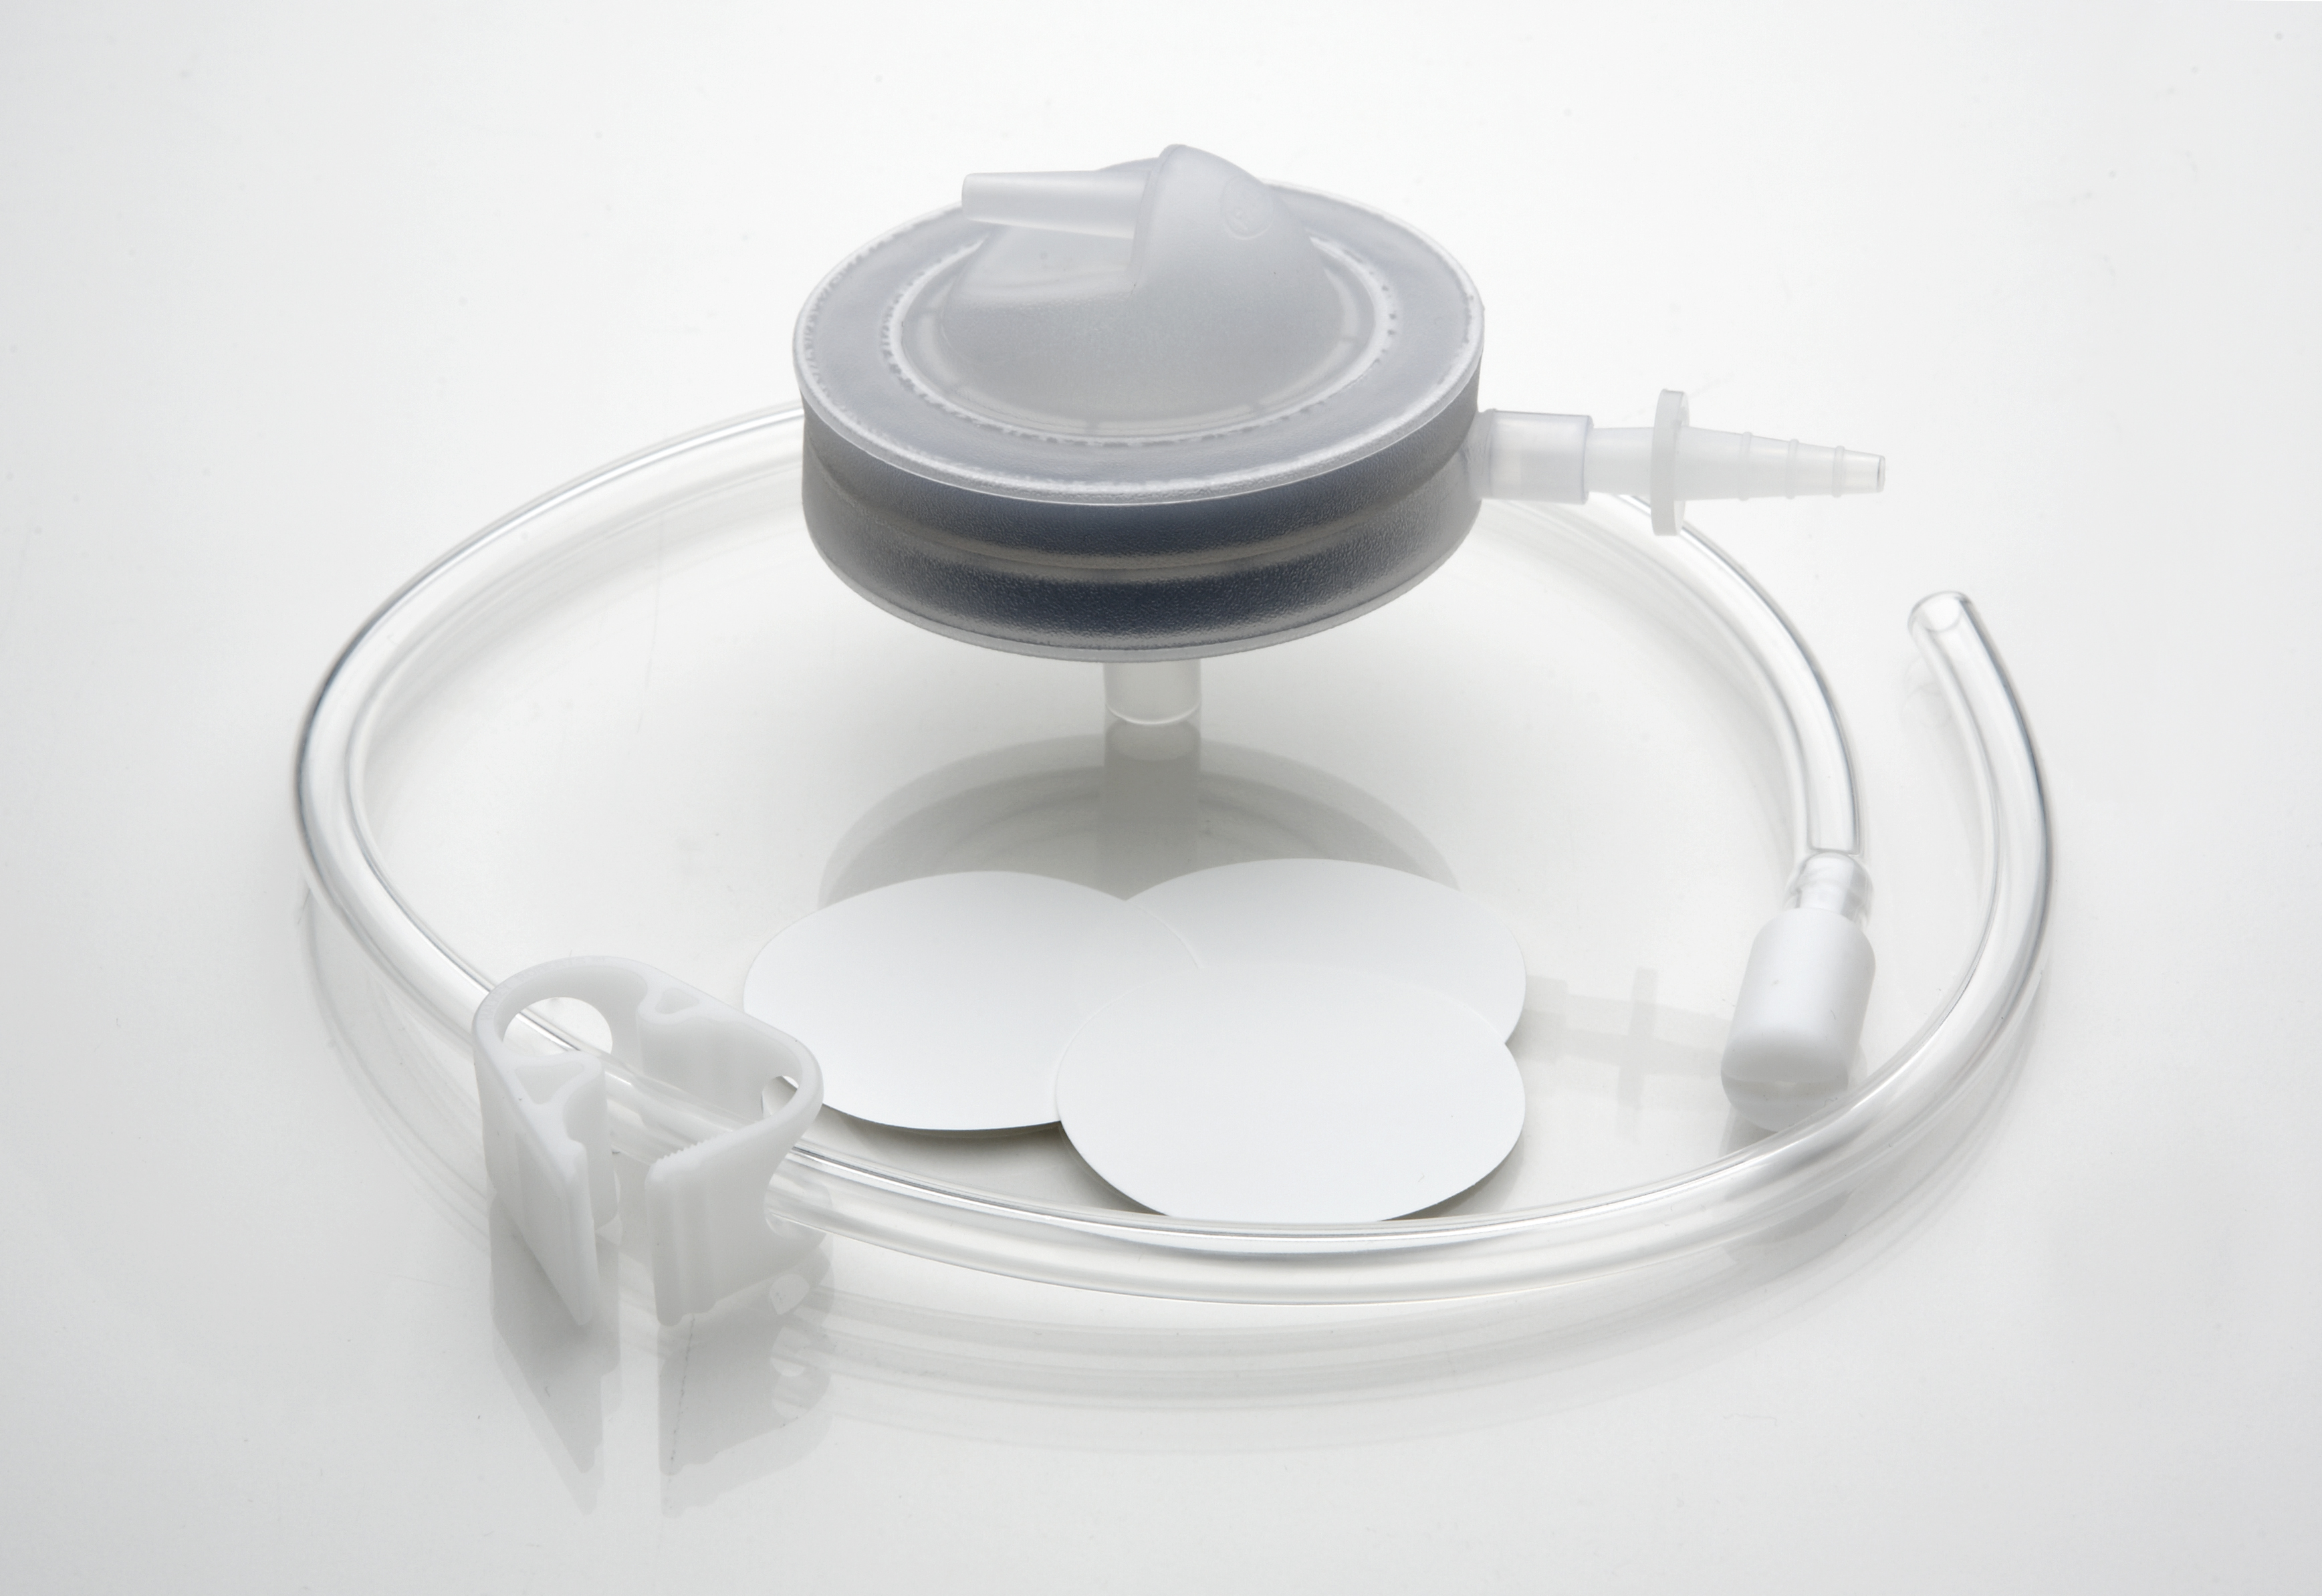 SolVac™ filter holder and membrane discs.